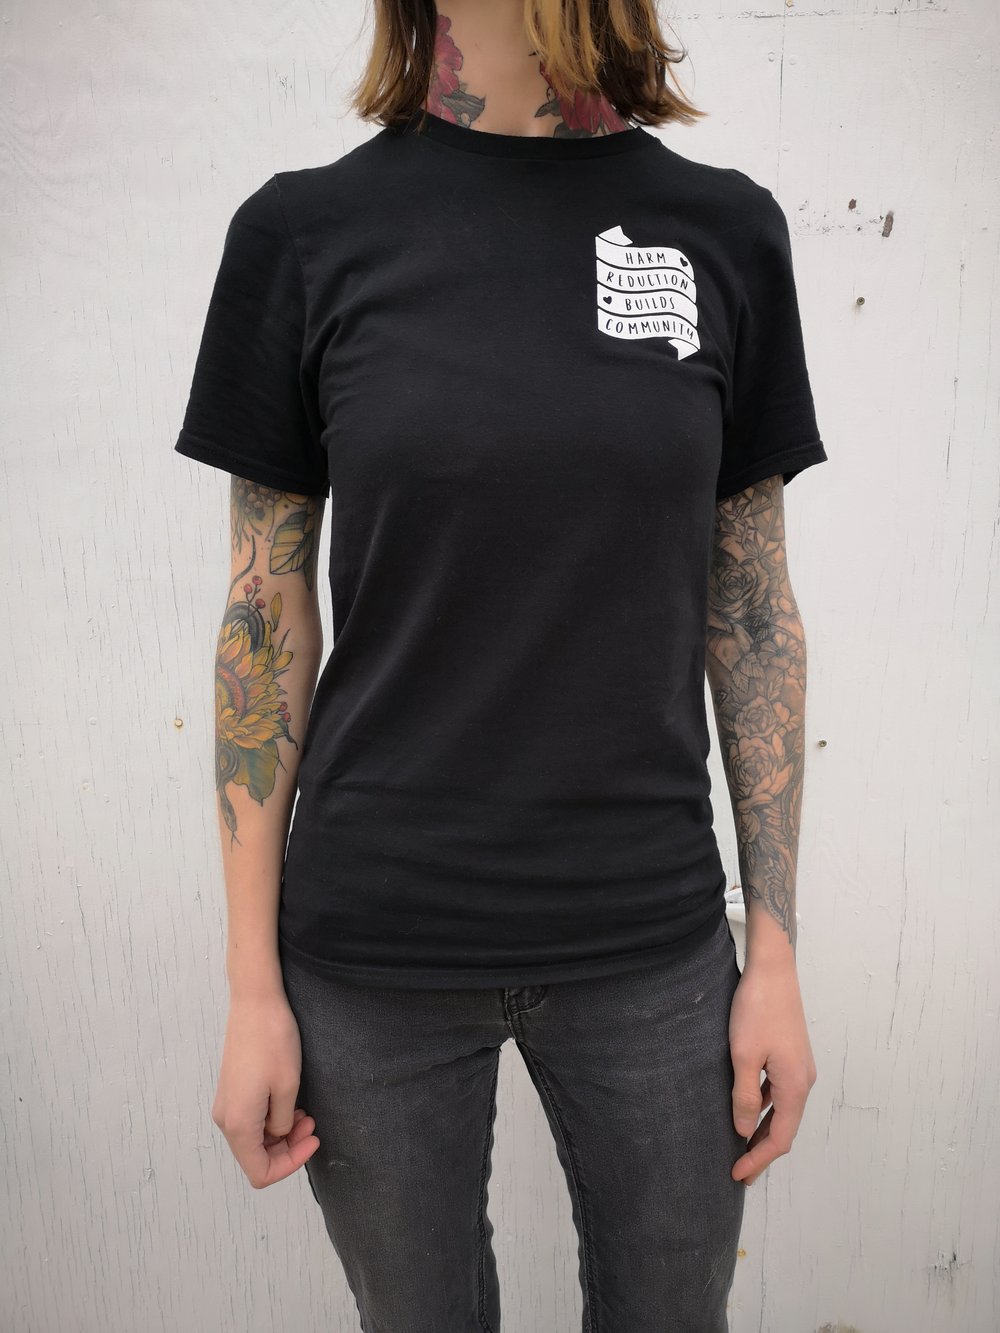 Harm Reduction tee (XS-4XL) RESTOCK COMING IN APRIL 